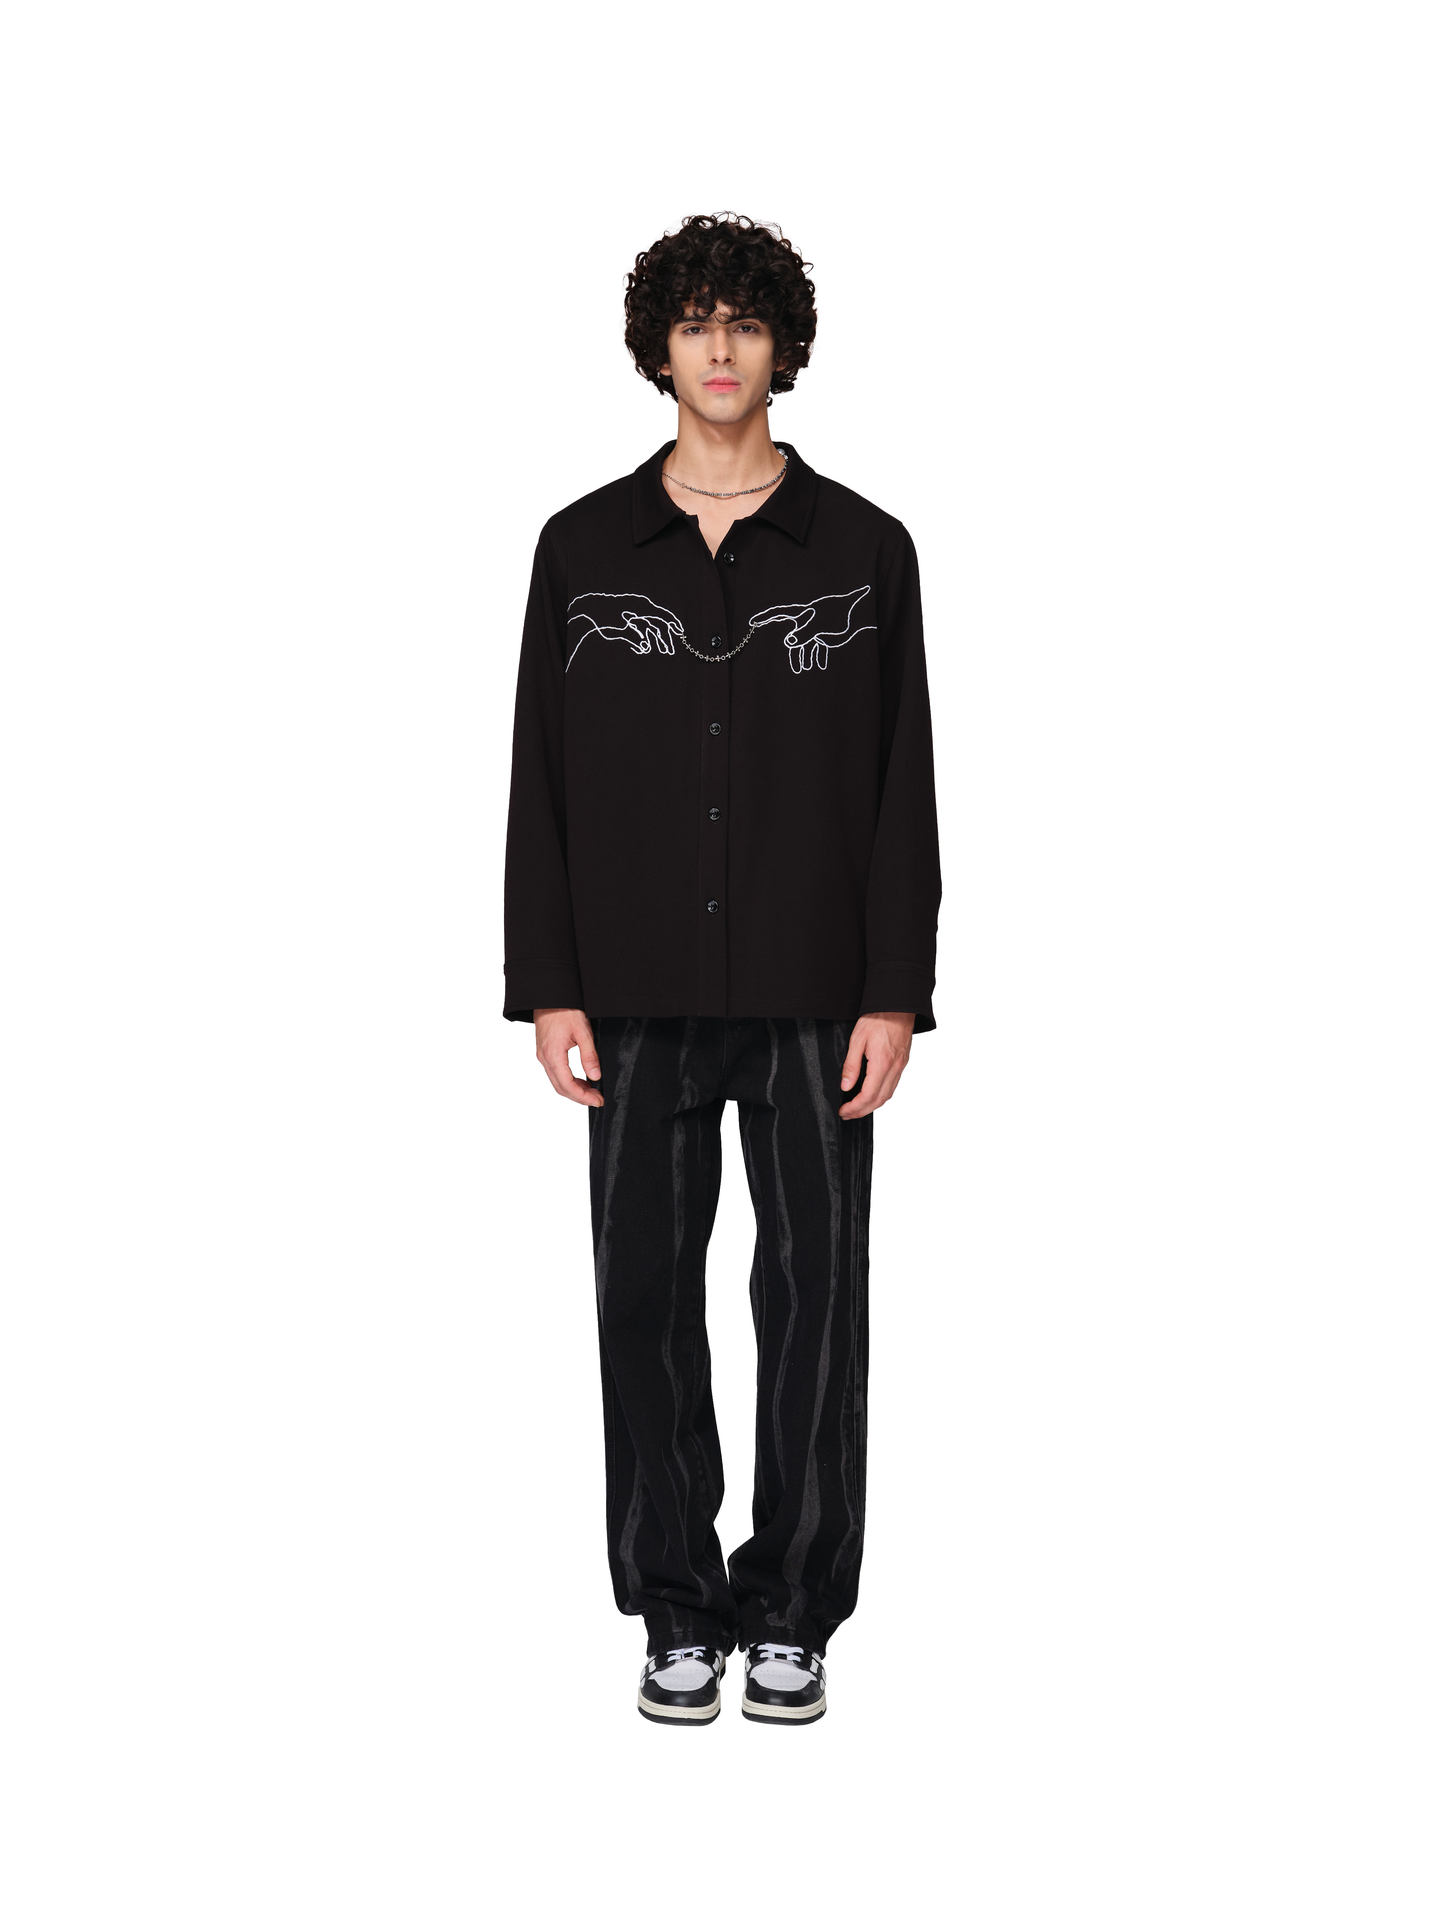 Genesis Embroidered AFF Silver Chain Lock Shirt